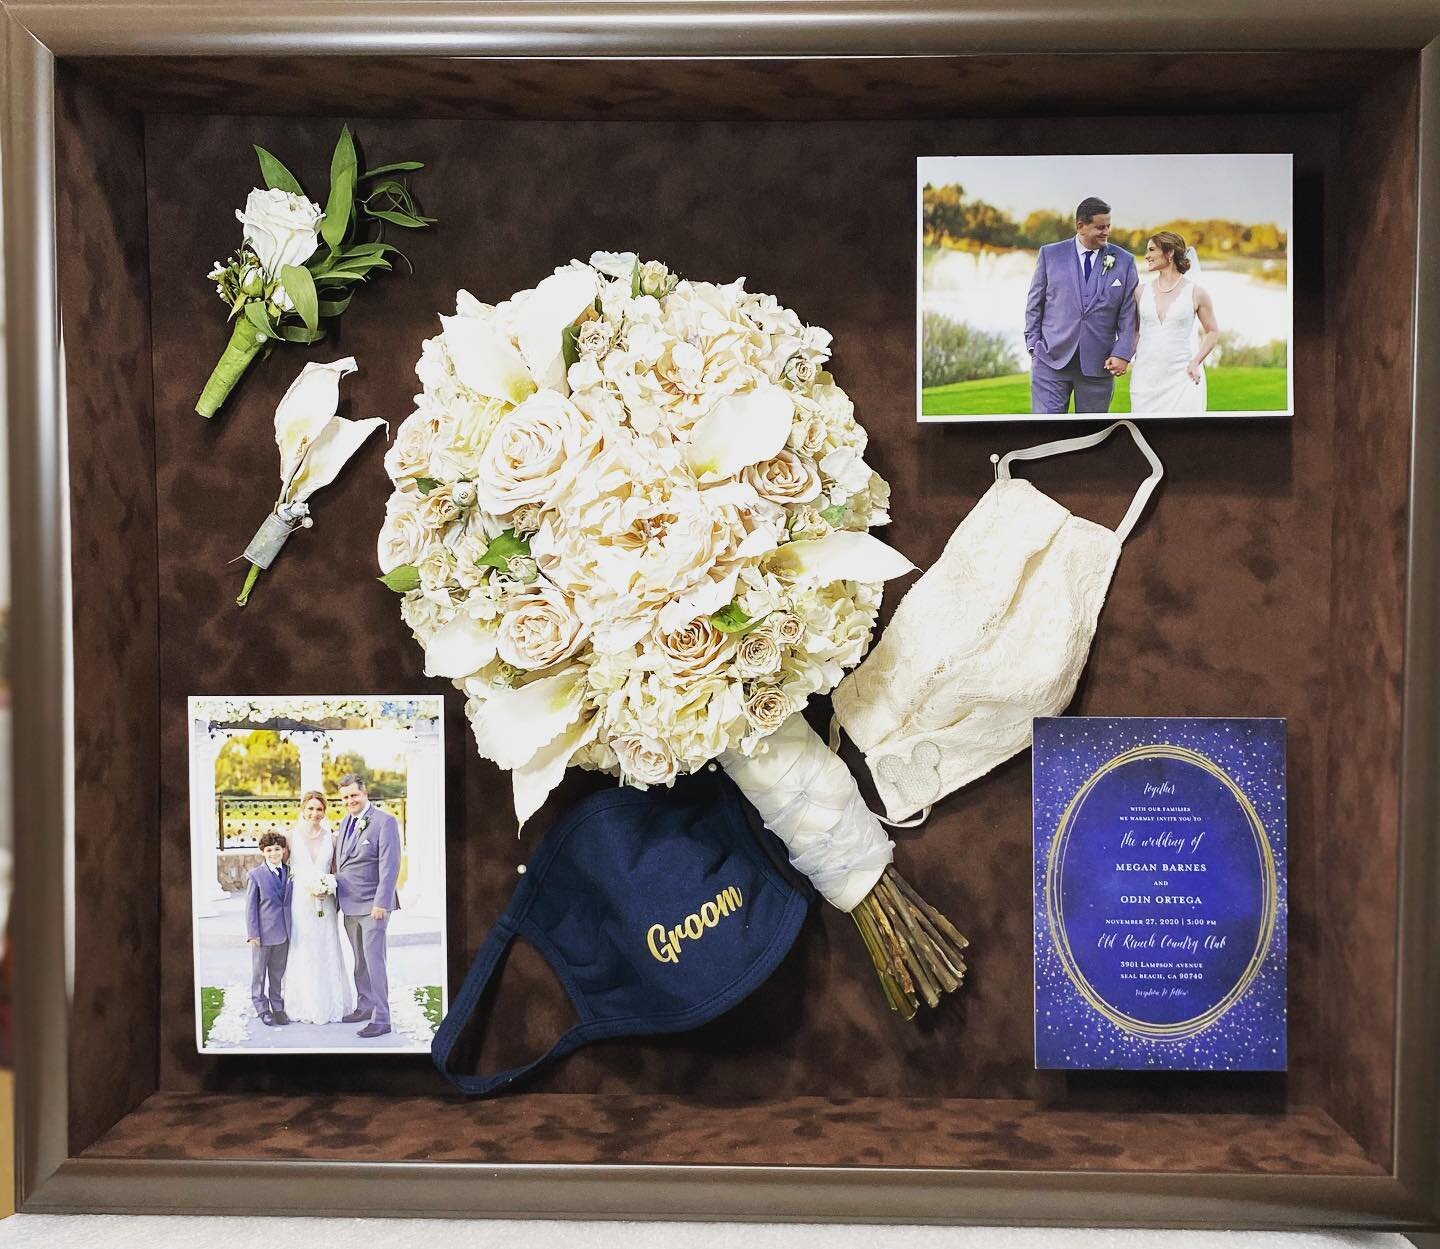 Another virtual wedding memory.  Now that we can gather ...the happy couple will be displaying this keepsake at their reception party!  Party On!
#weddingkeepsake #virtualwedding #preservedflowers #bridalbouquet #floralpreservation